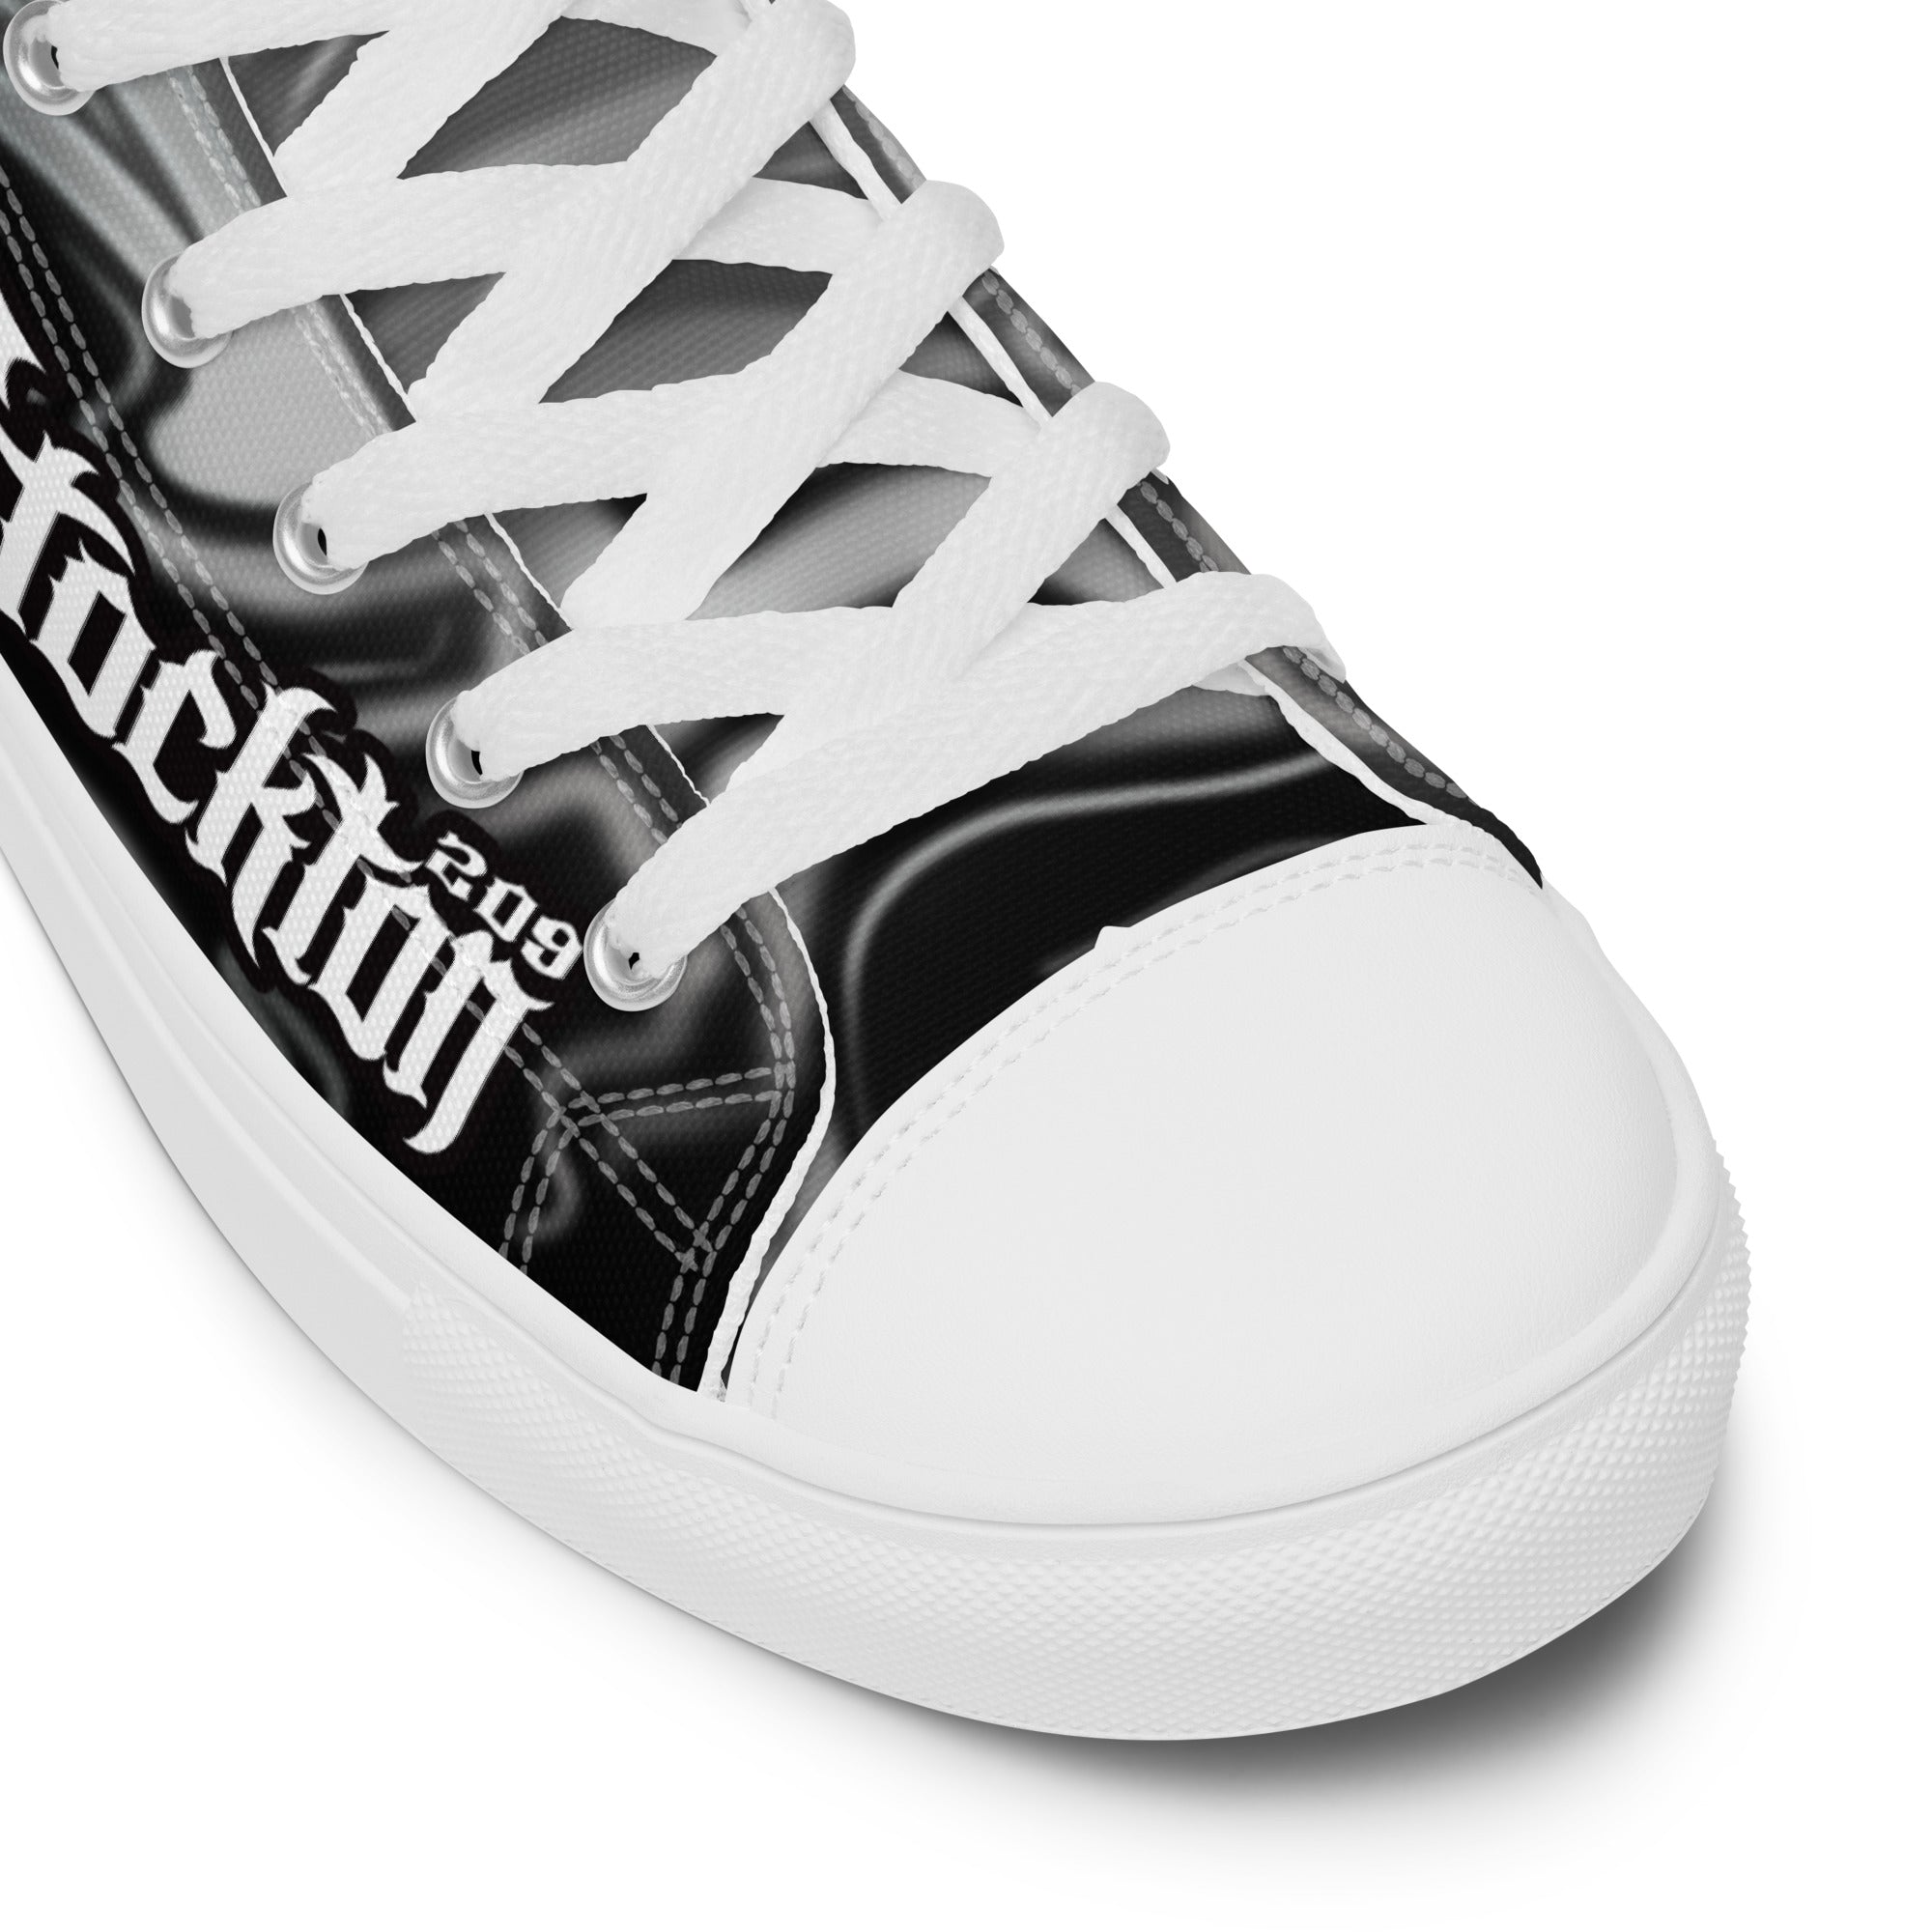 Stockton 209 - Diaz Brothers Inspired Shoe Shoes